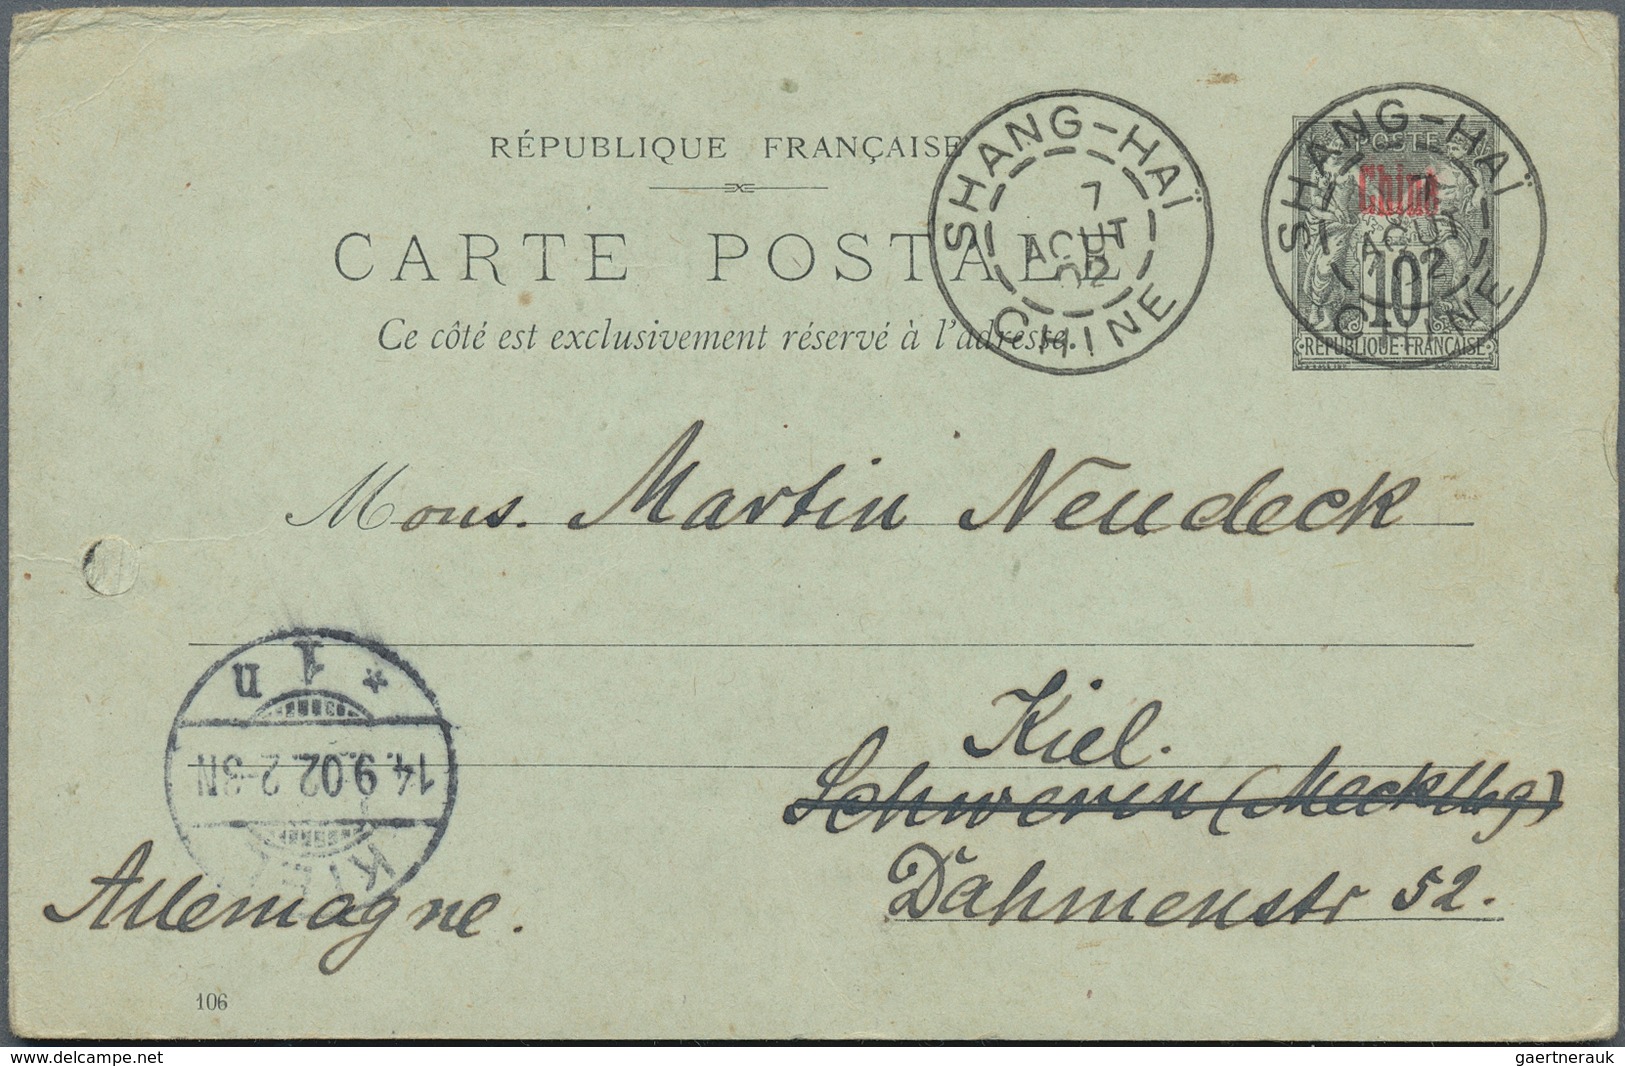 China: 1898/1910 (ca.), all used stationery or ppc, China (2) and foreign offices in China: France (